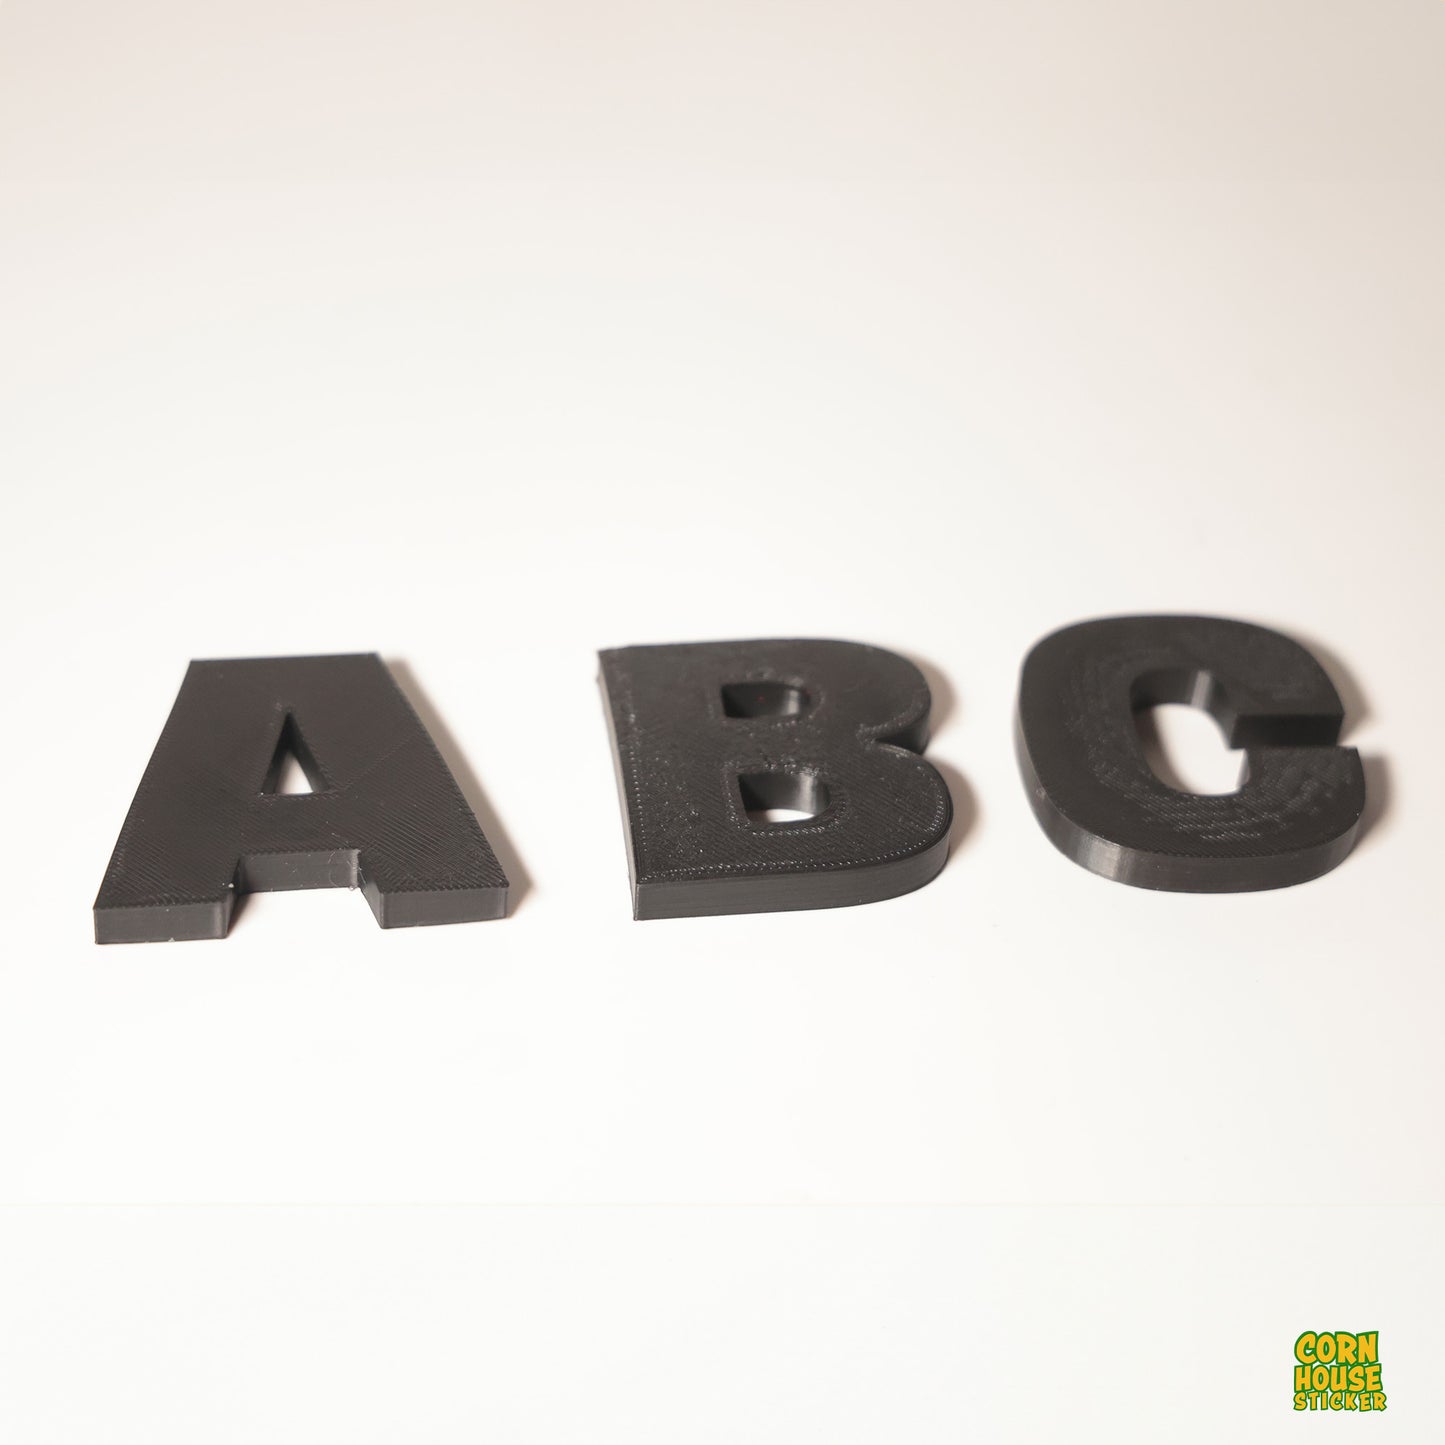 3D Printed letters